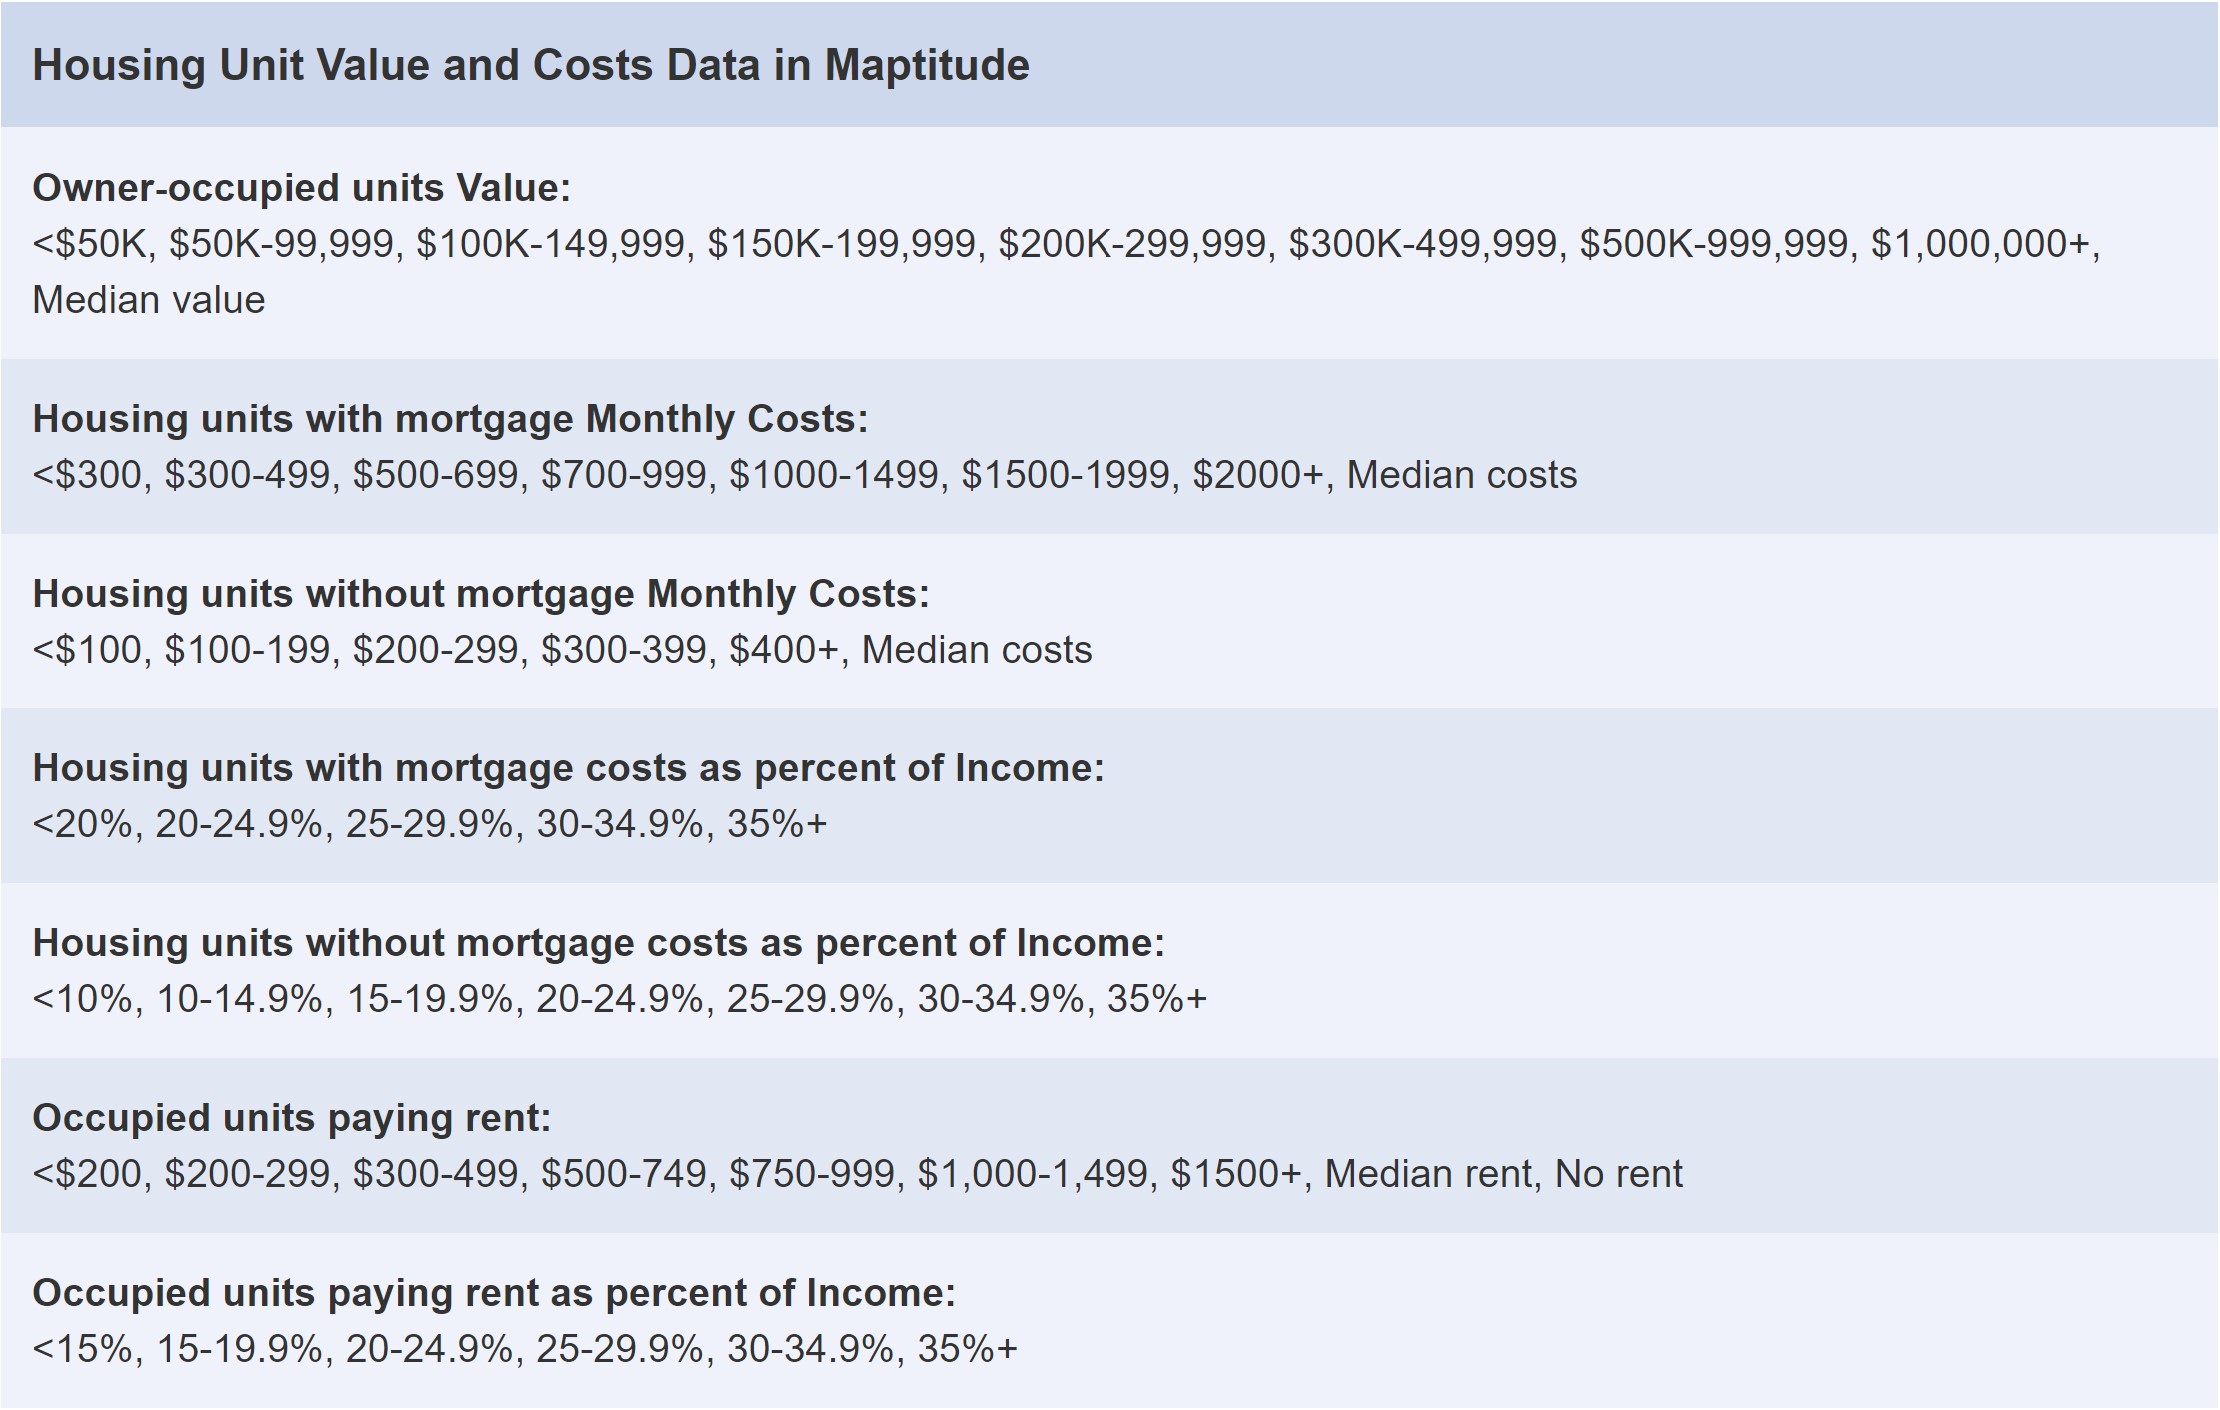 What Census Data Is Available Related to the Housing Market? Table of Census Data that are available.